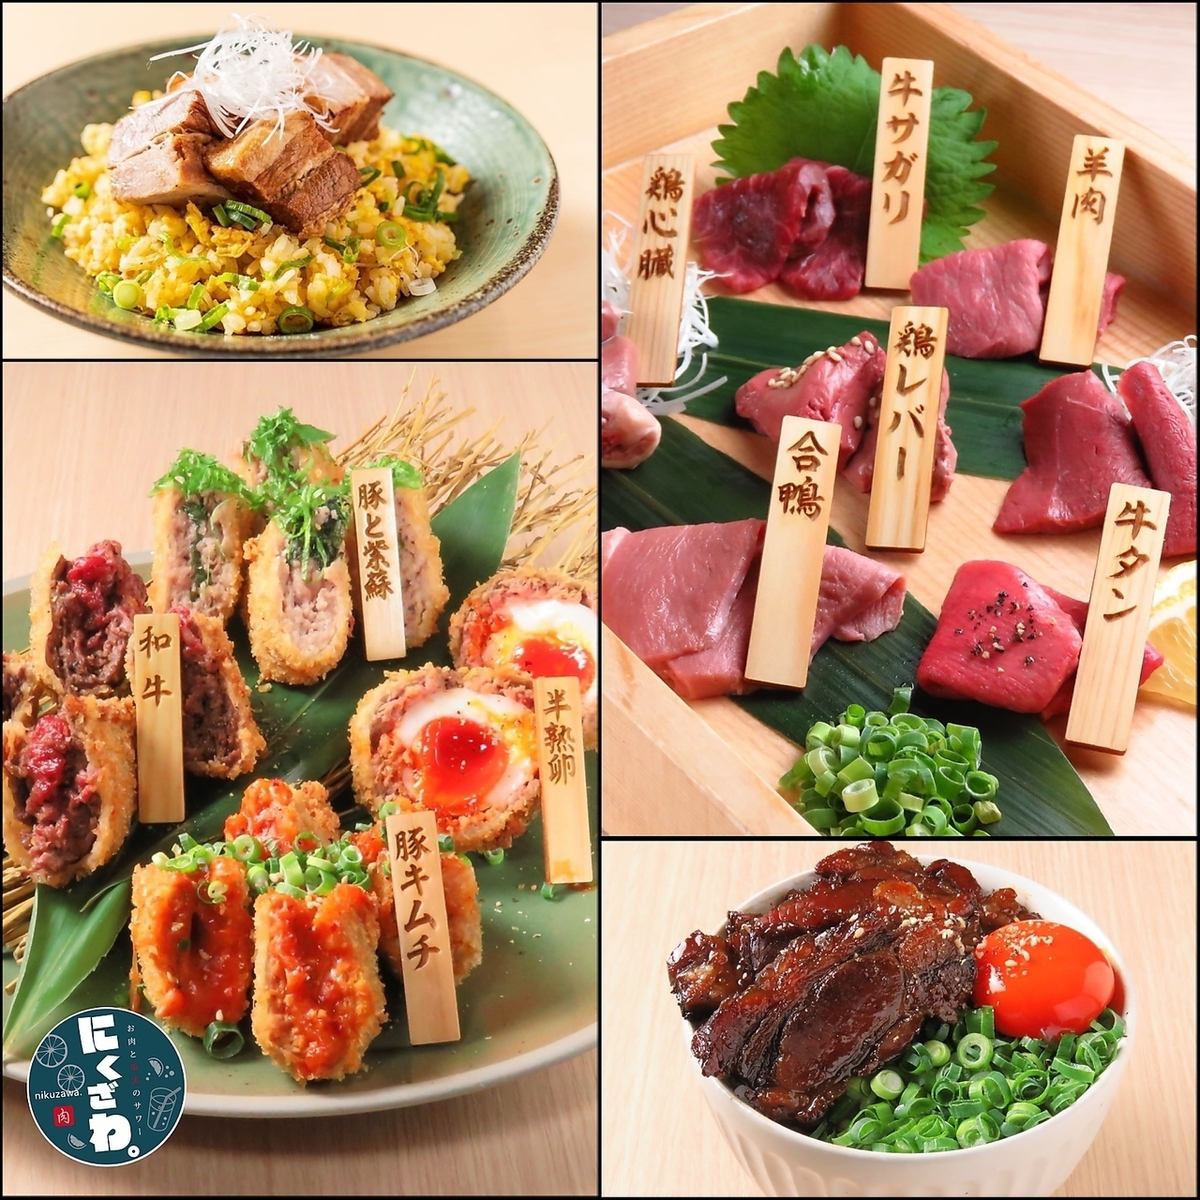 Meat sashimi! Beef cutlet, mince cutlet and a la carte dish.Leave the meat dishes to us!